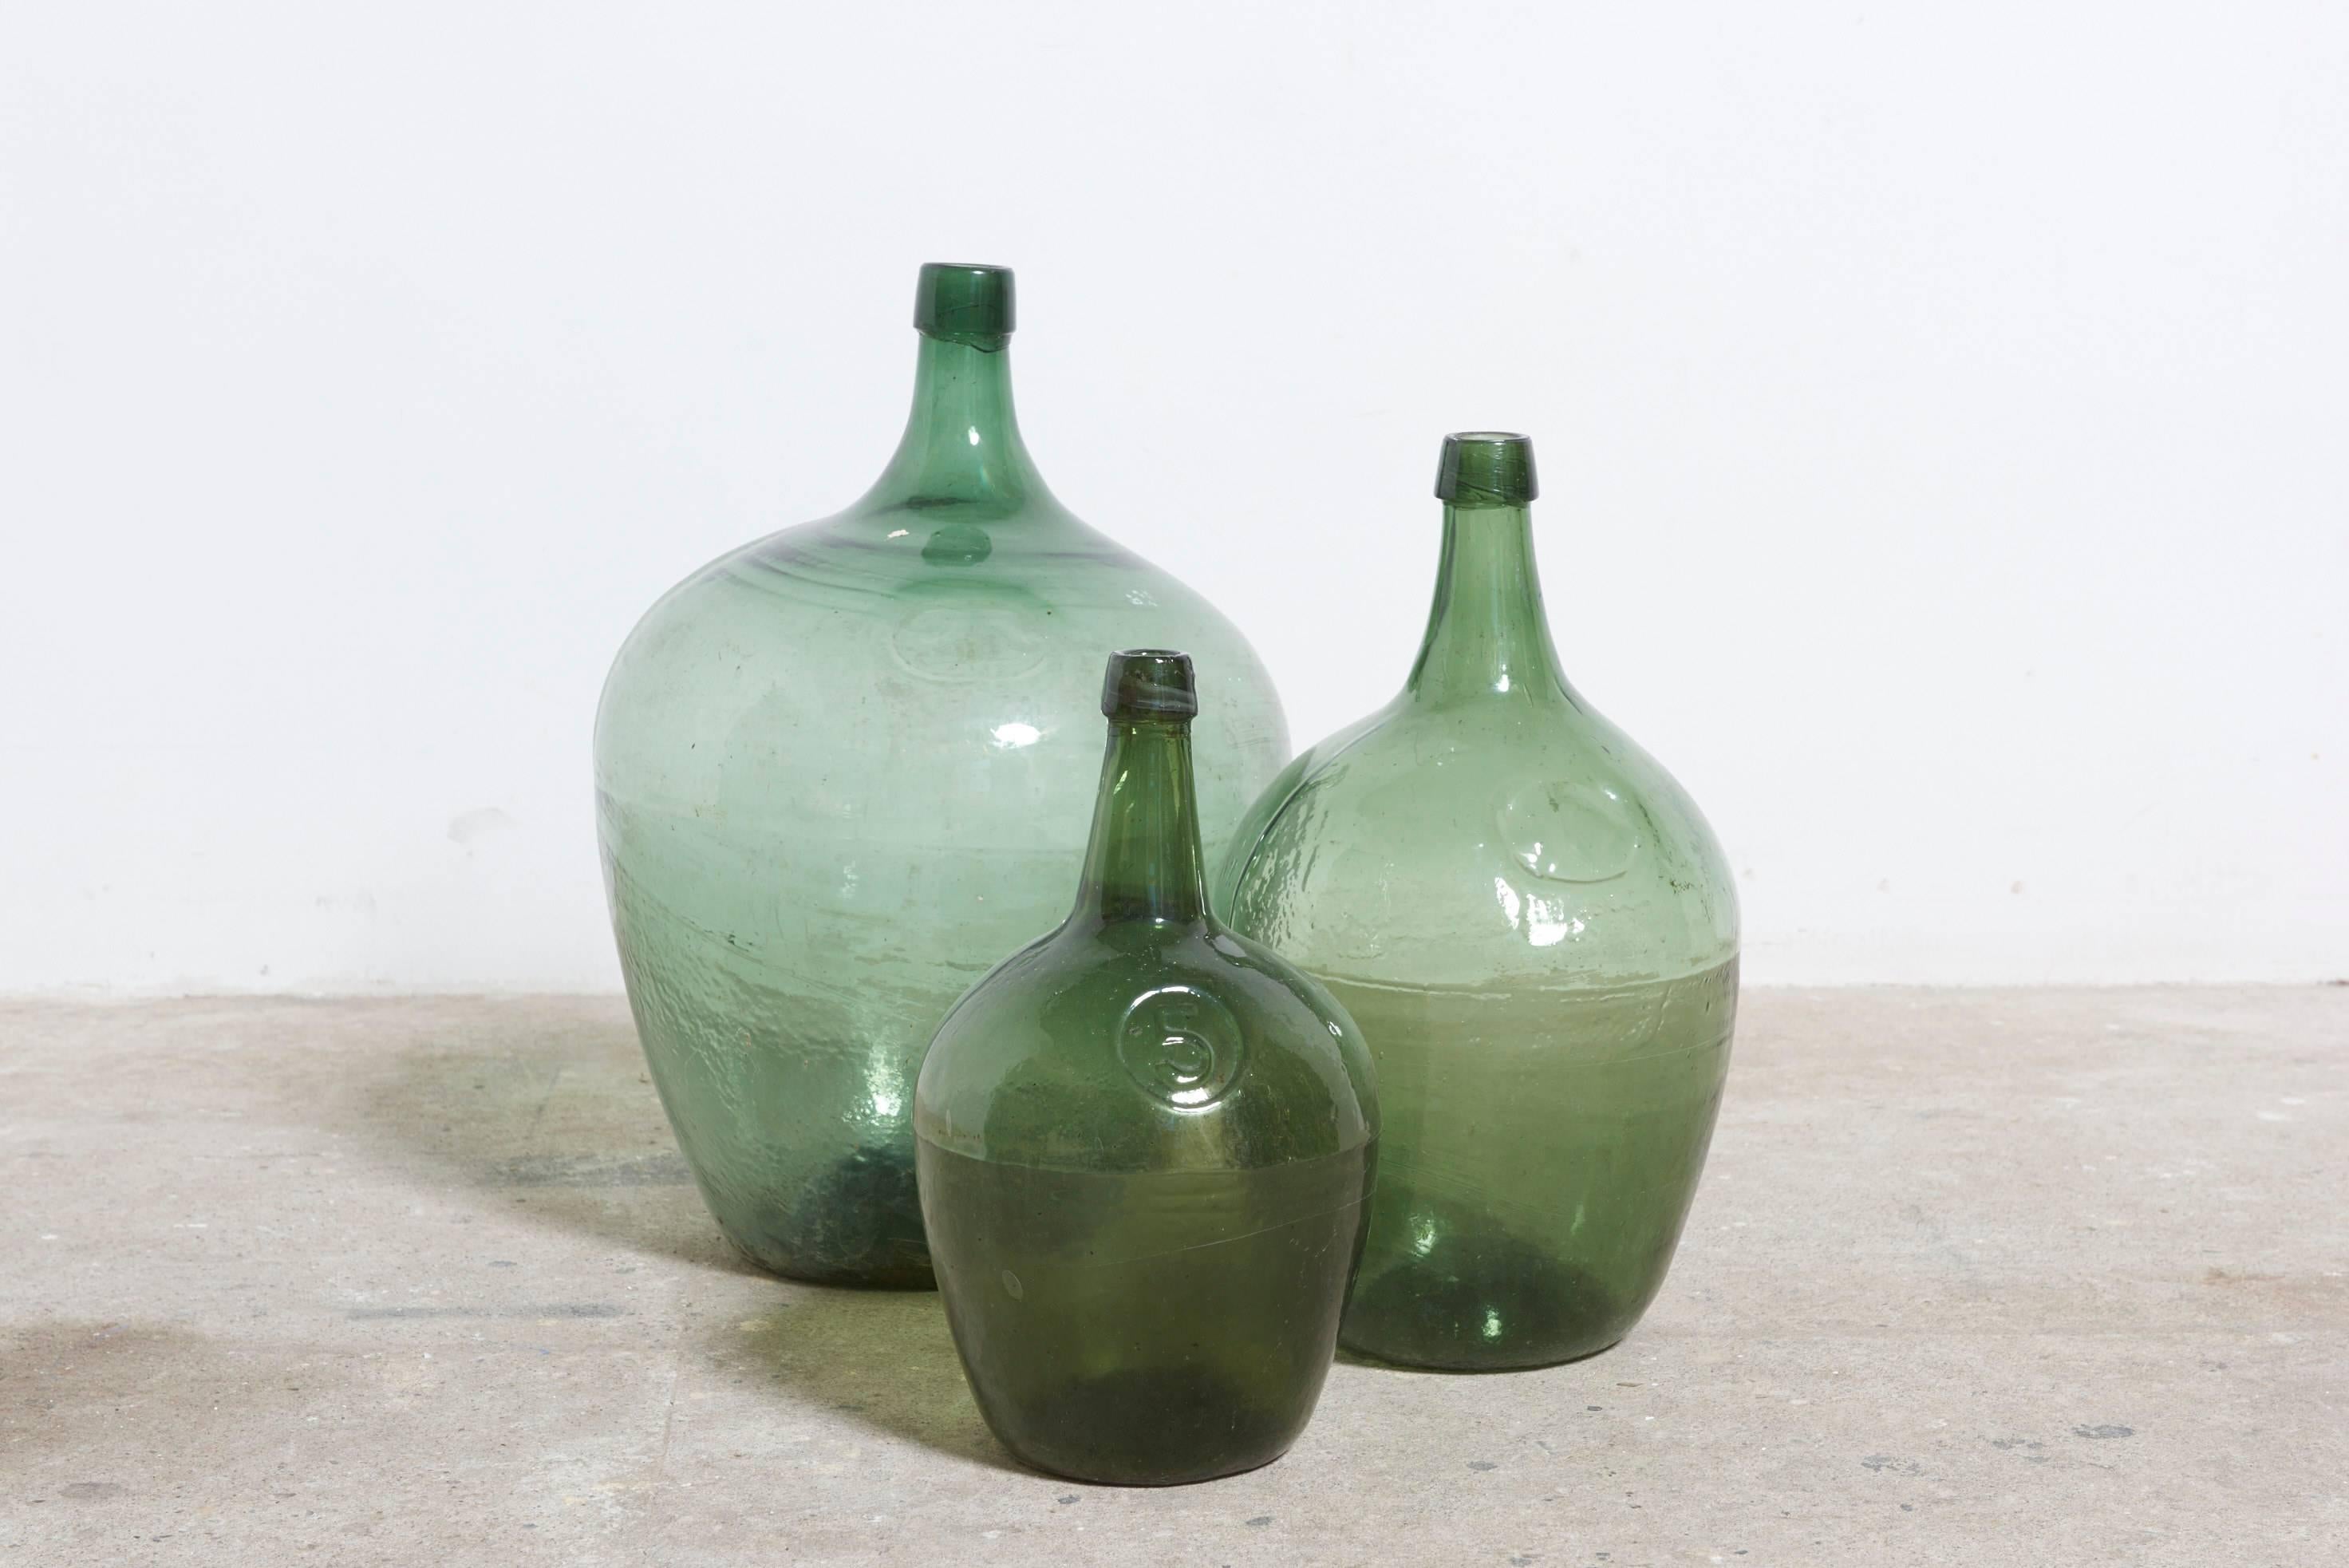 Free-blown bottles 5.L   .10.L.   20.L.  with rough pontils and applied lips manufactured in Mecklenburg, 19th C.Germany.
Demijohn is an old word that formerly referred to any glass jars, bulk bottles with a large body and small neck.
The word comes